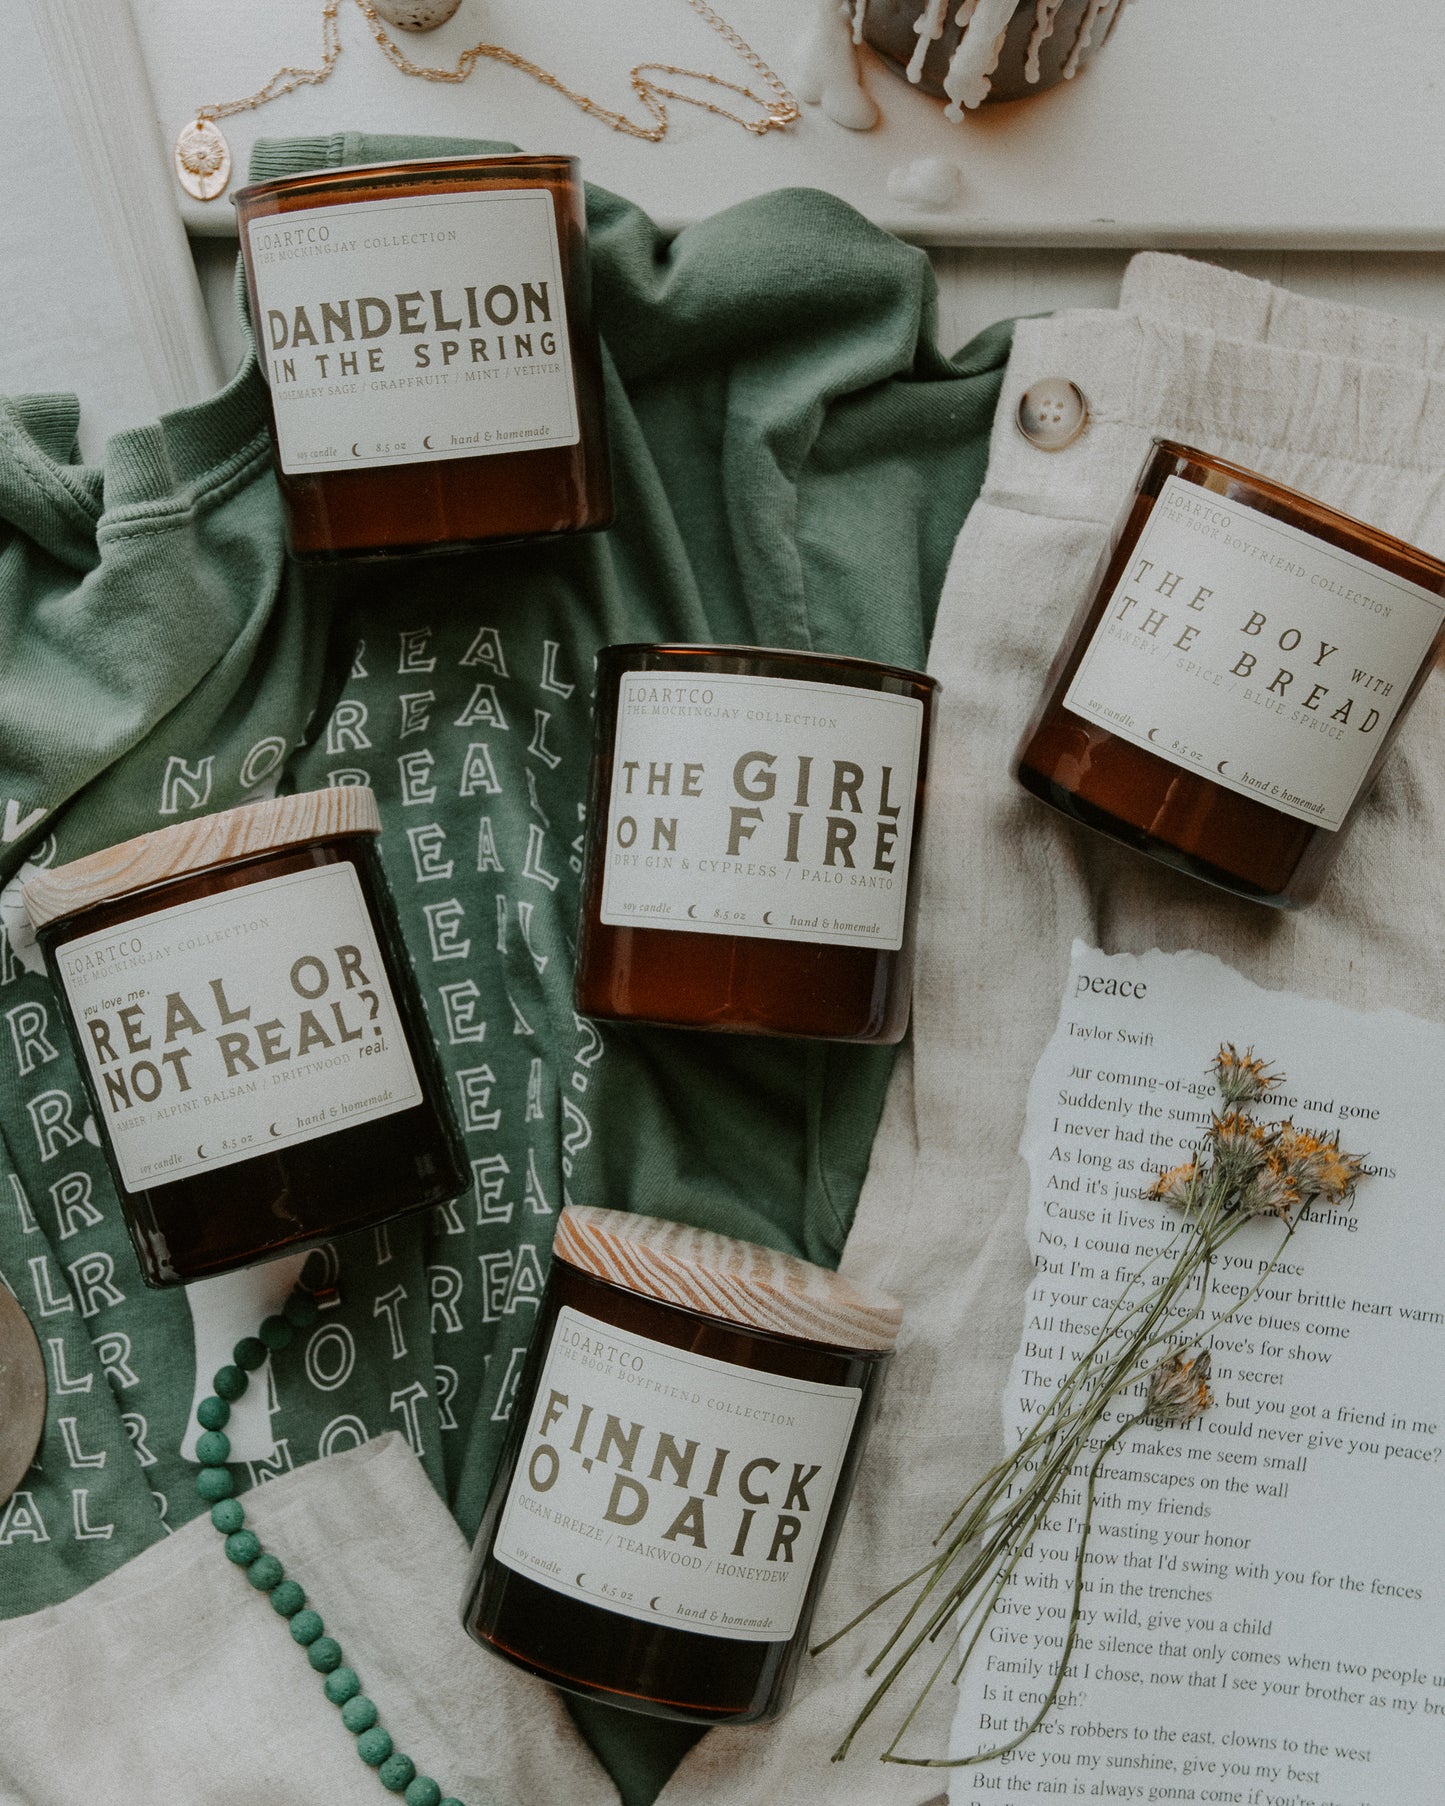 Real or not Real Soy Candle